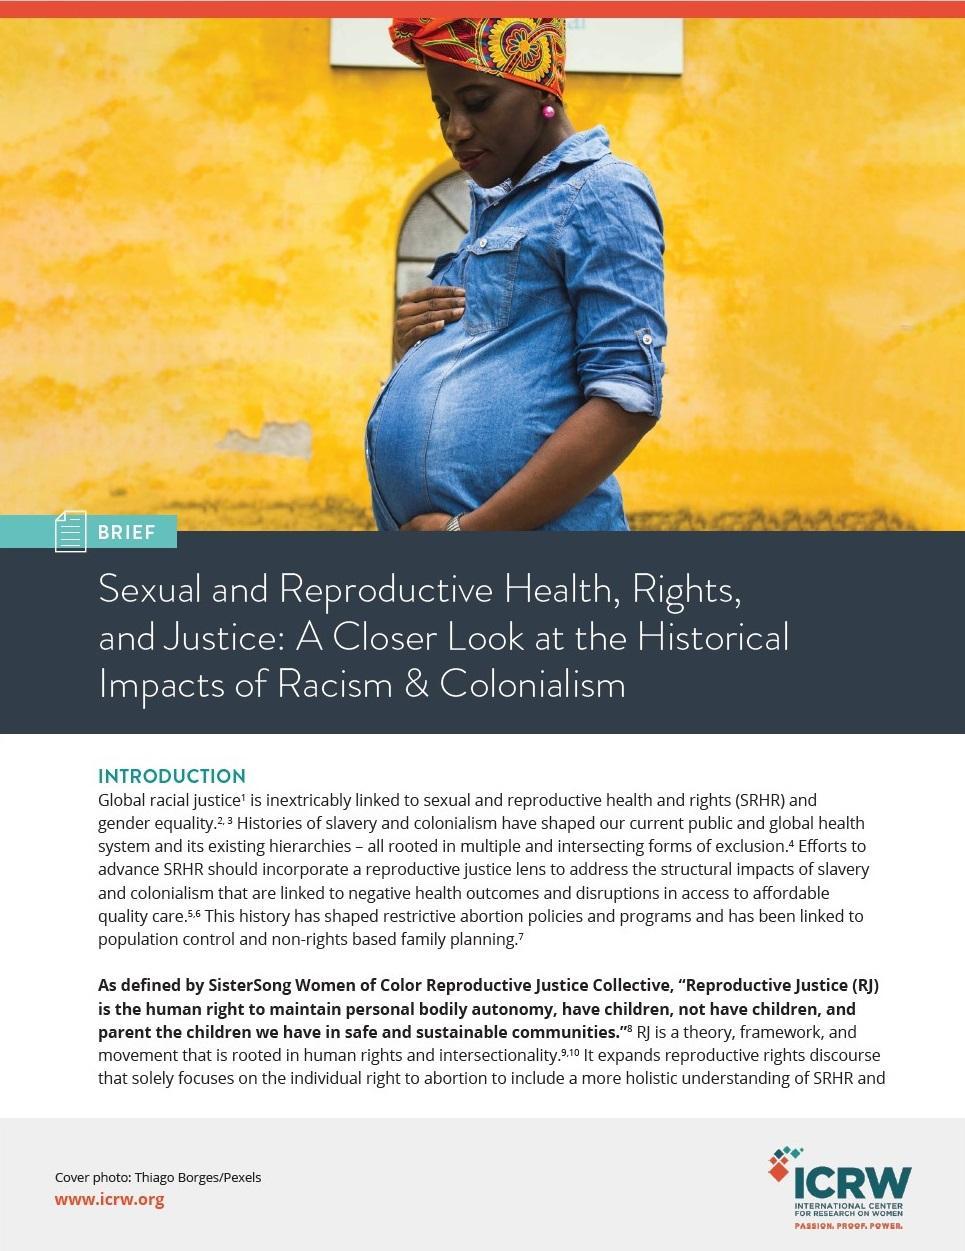 SRHR and Justice: A Closer Look at the Historical Impacts of Racism & Colonialism